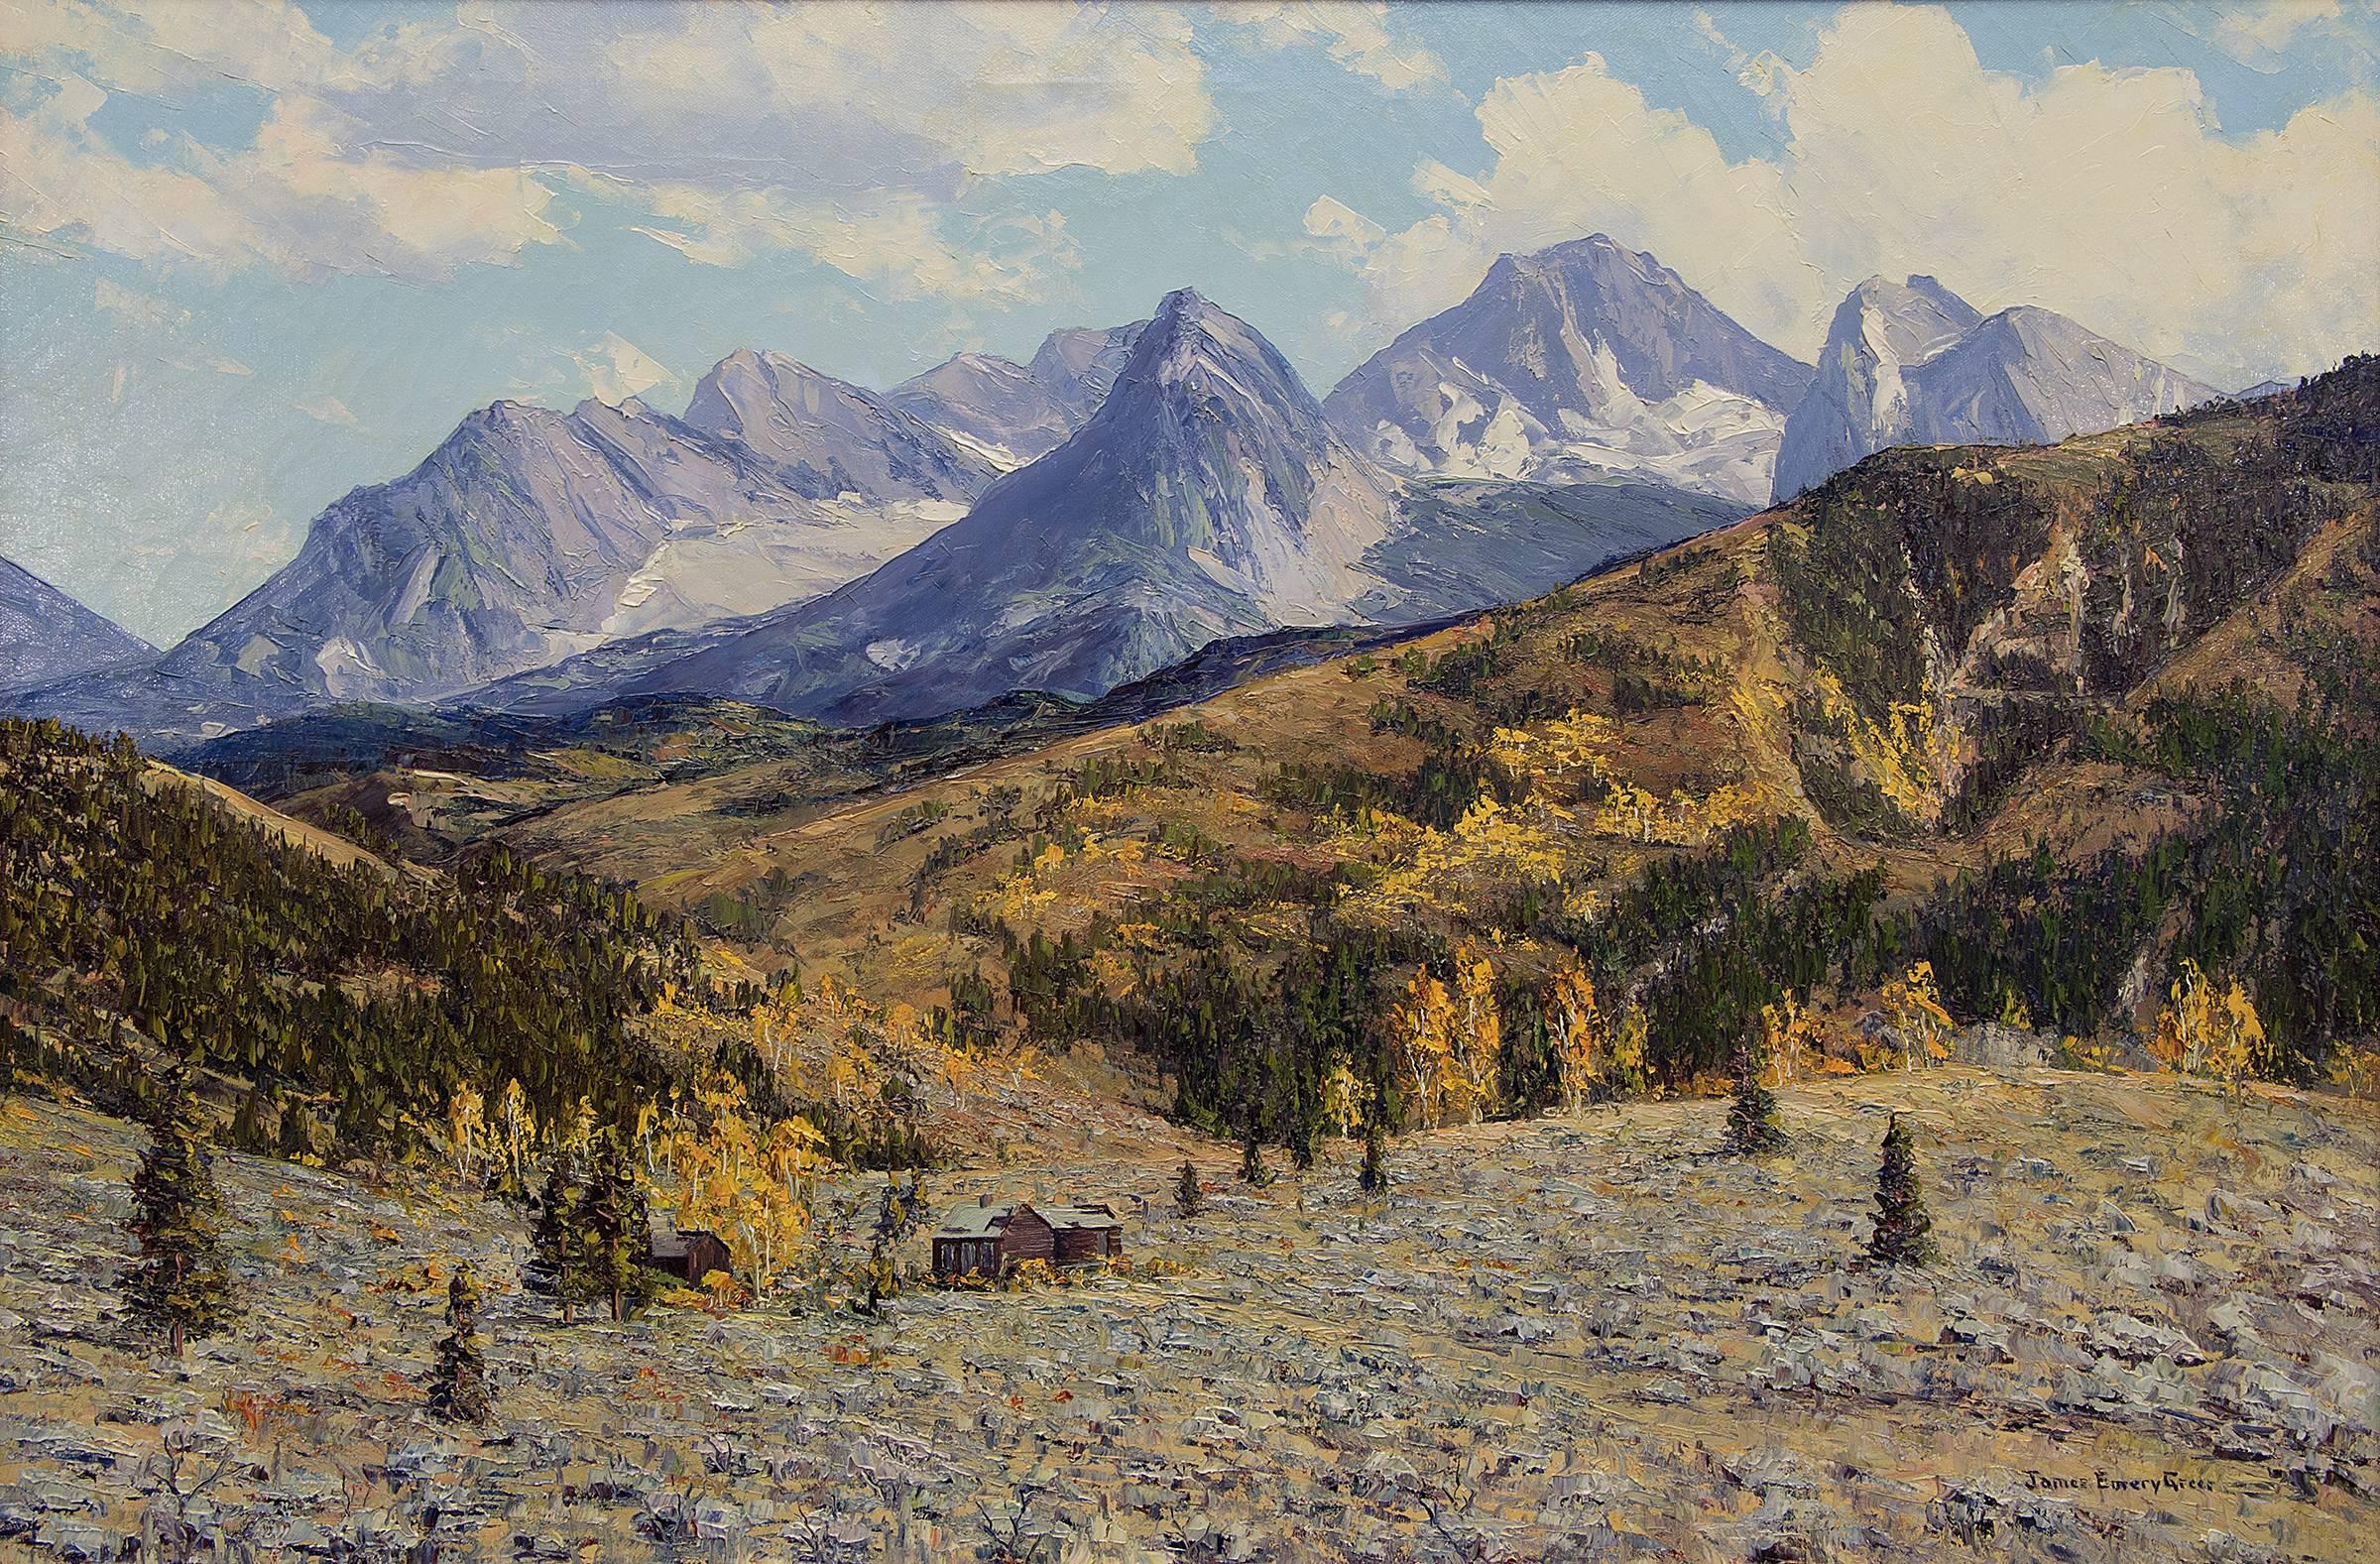 The Sage Reclaims the Land (Near Marble, Colorado) - Painting by James Emery Greer